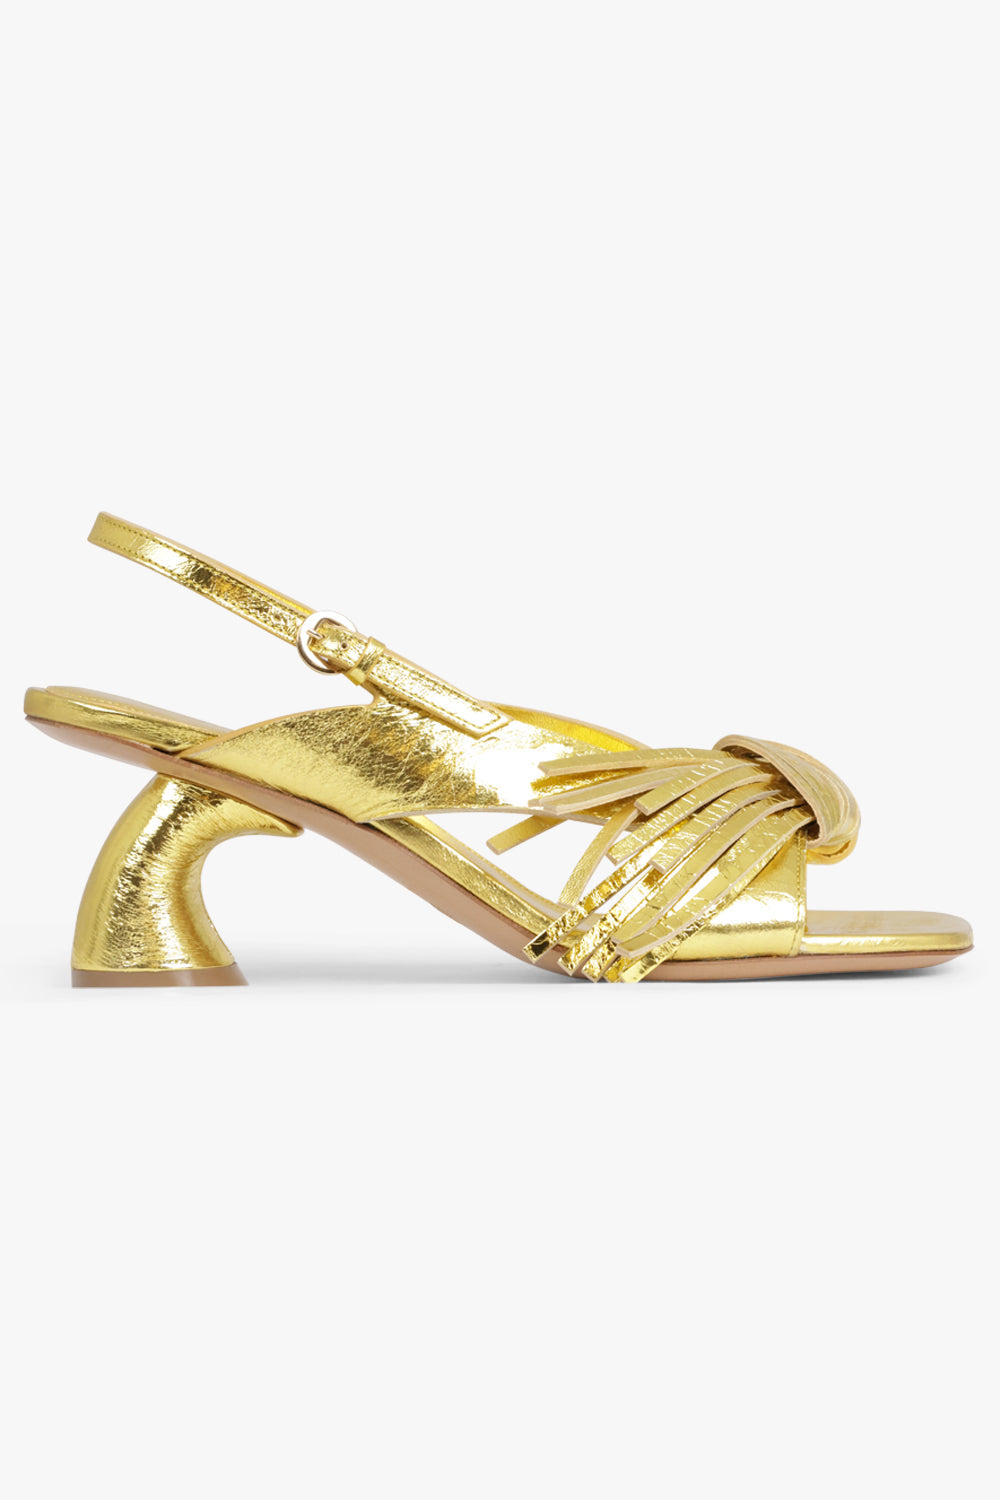 DRIES VAN NOTEN SHOES Bow Detail Curved 50Mm Heeled Sandal | Gold